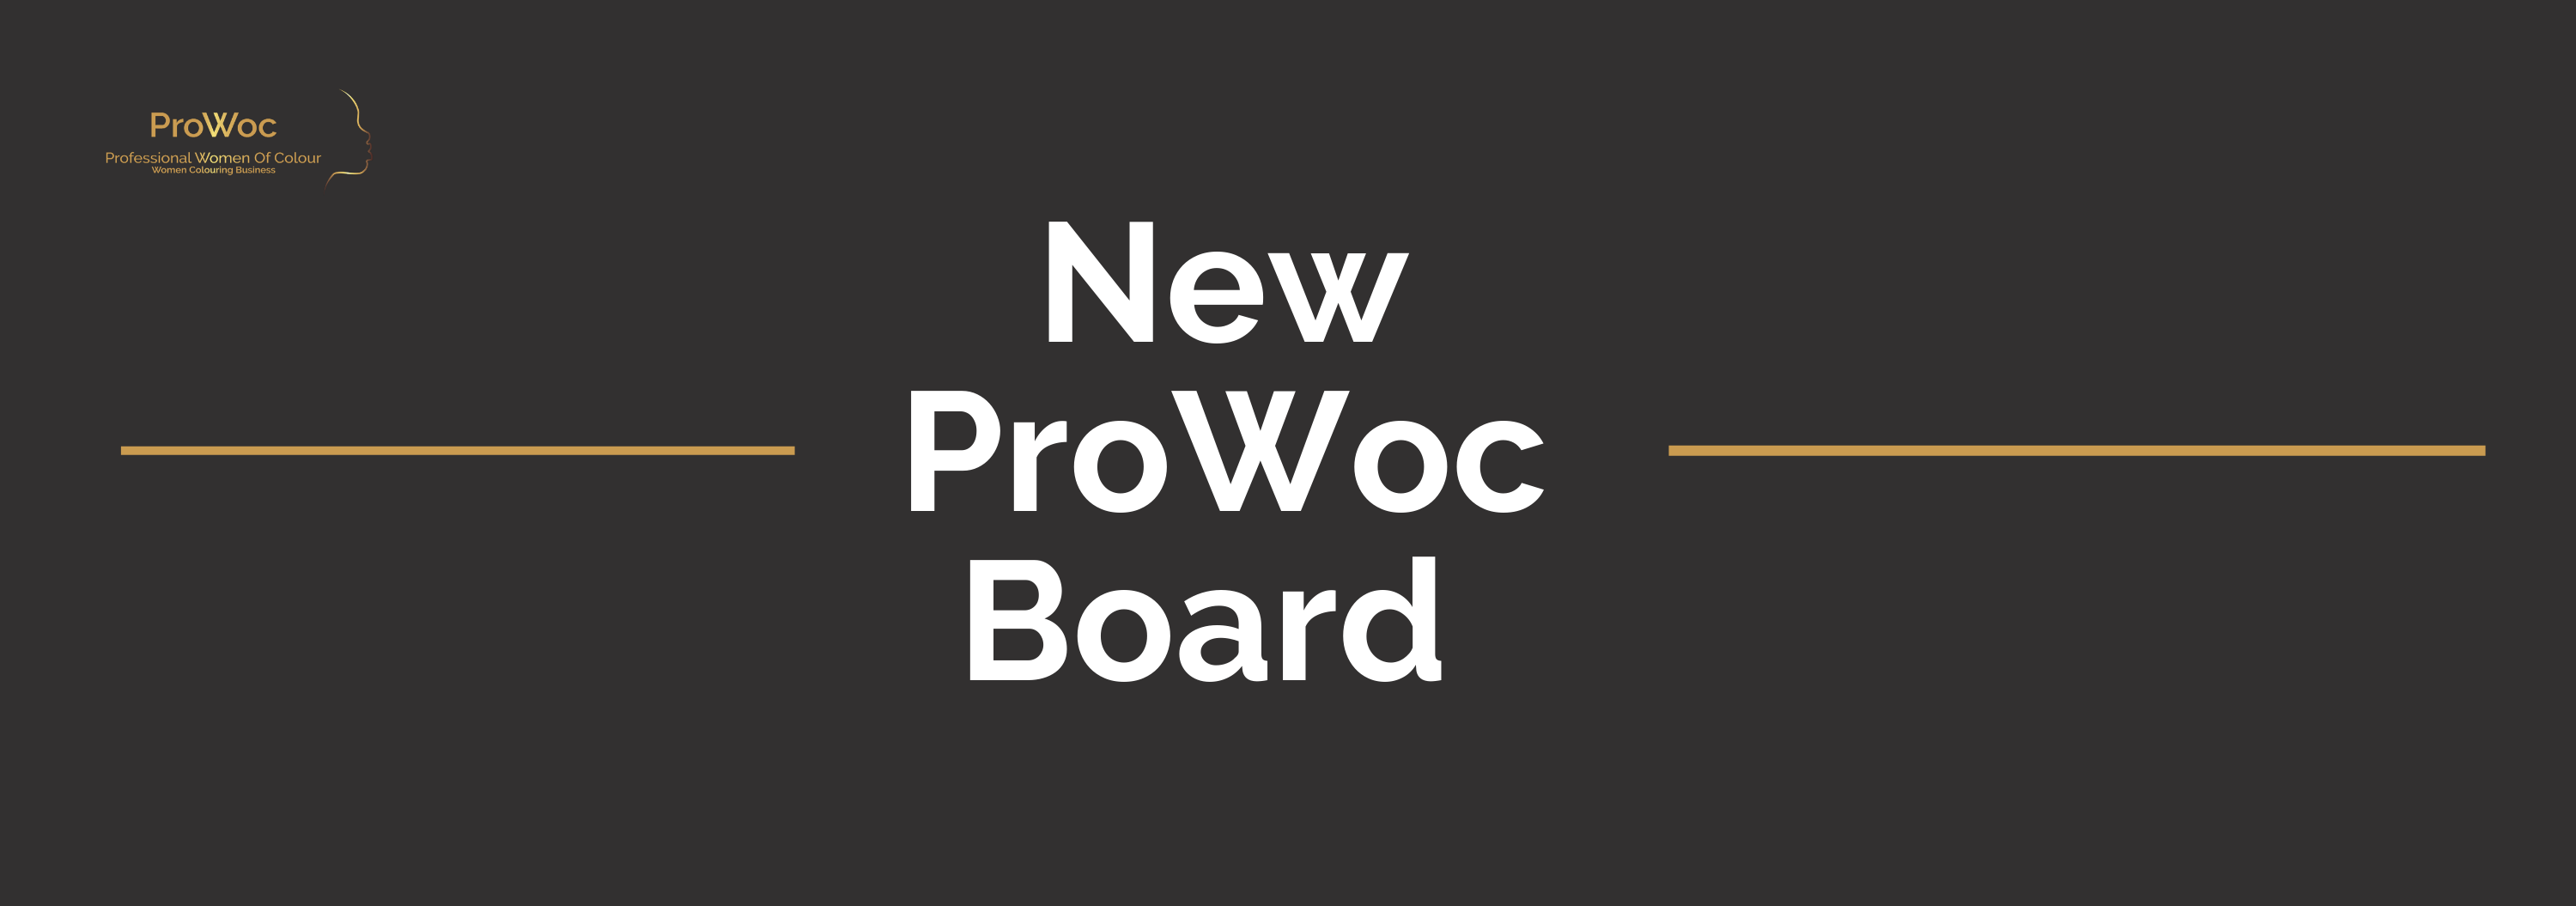 ProWoc is happy to introduce its new board